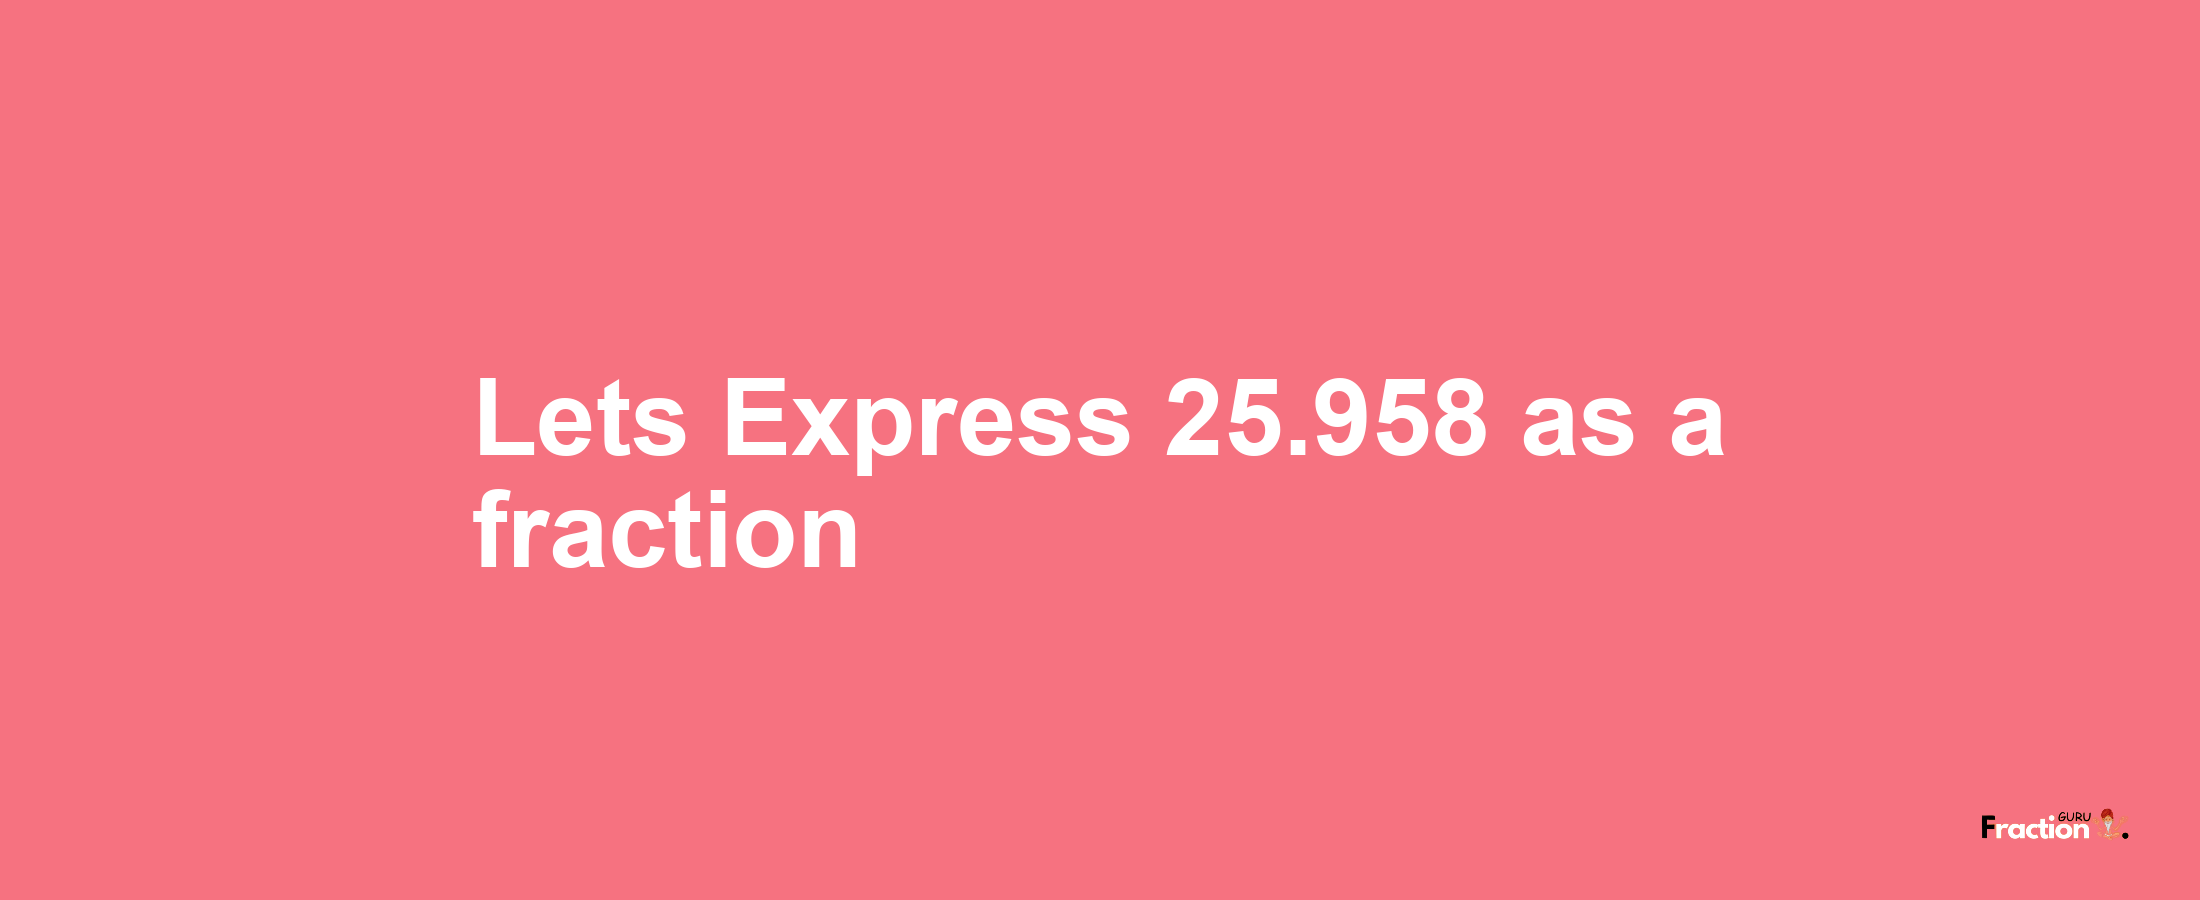 Lets Express 25.958 as afraction